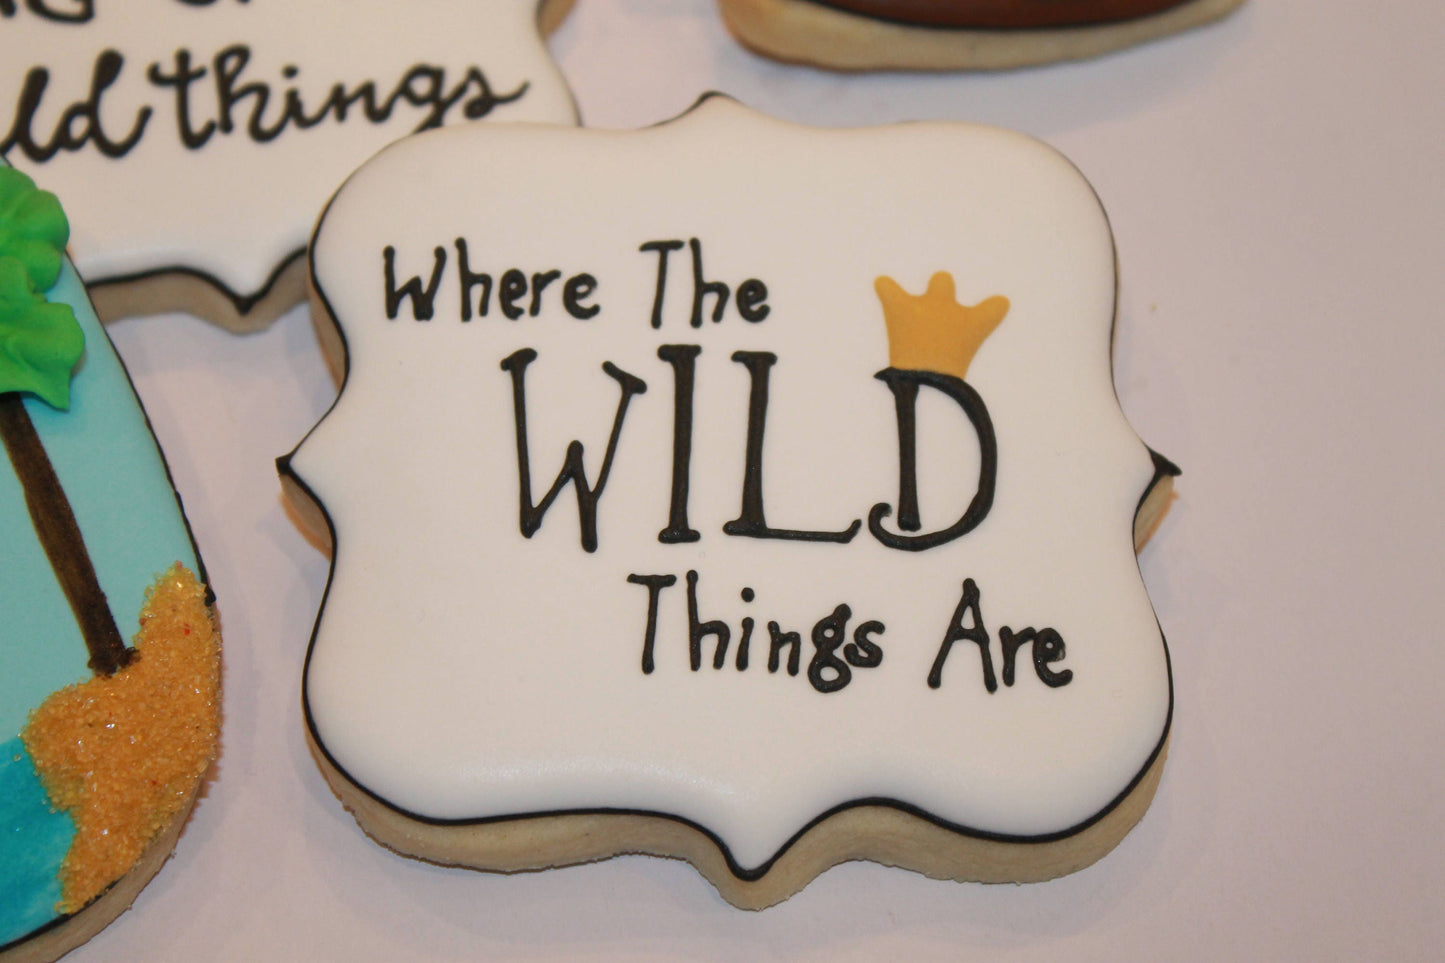 Where the Wild Things Are cookies (inspired) One Dozen (12) - Ladybug bake shop